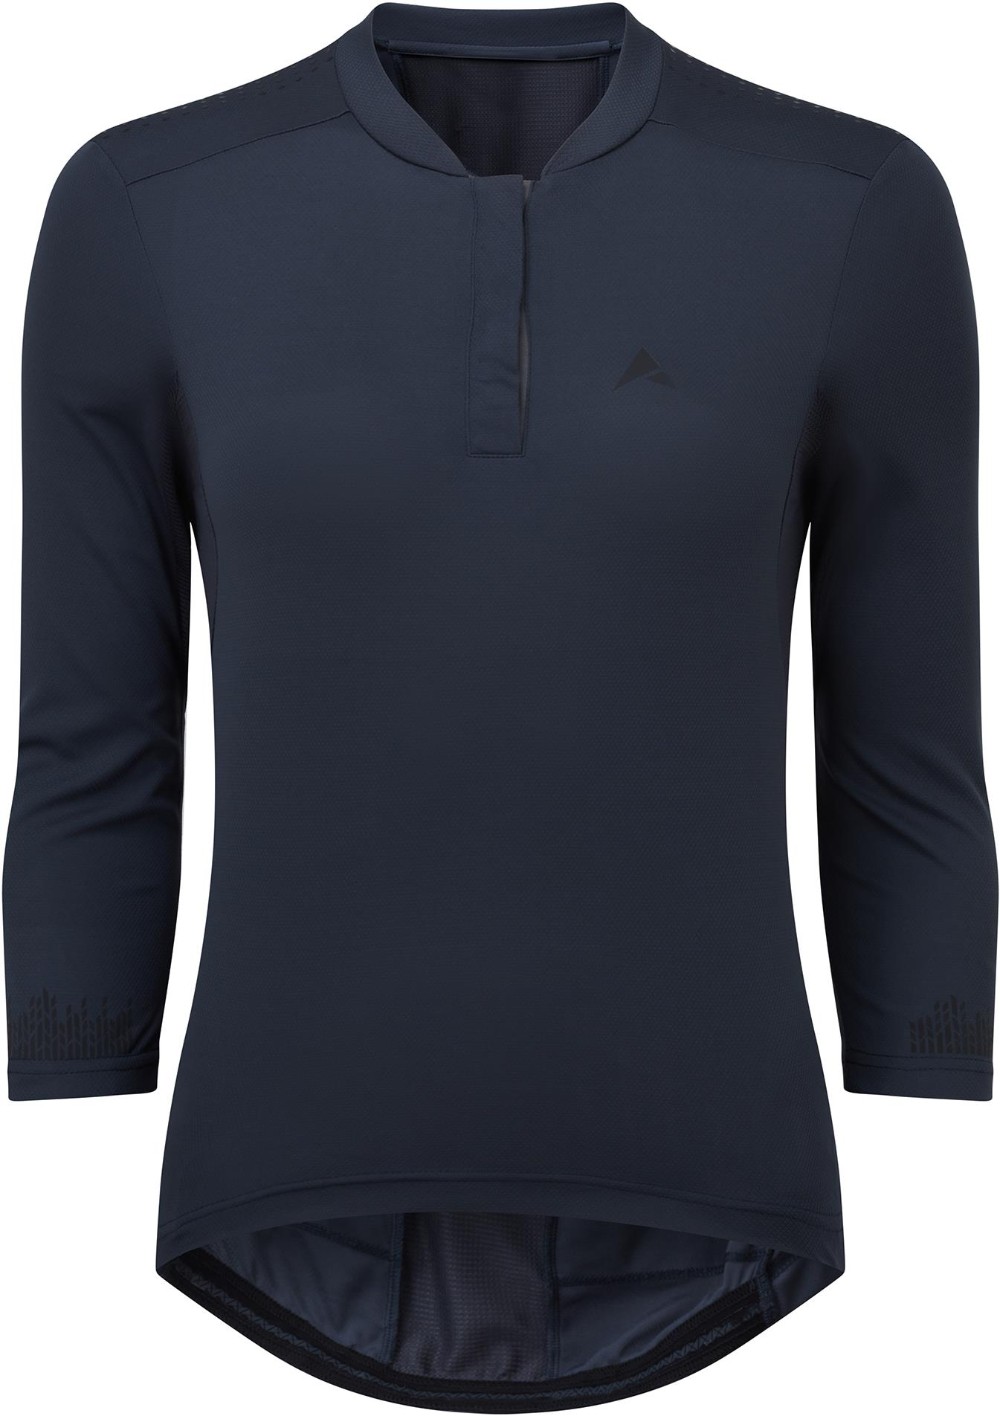 All Roads Womens 3/4 Sleeve Jersey image 0